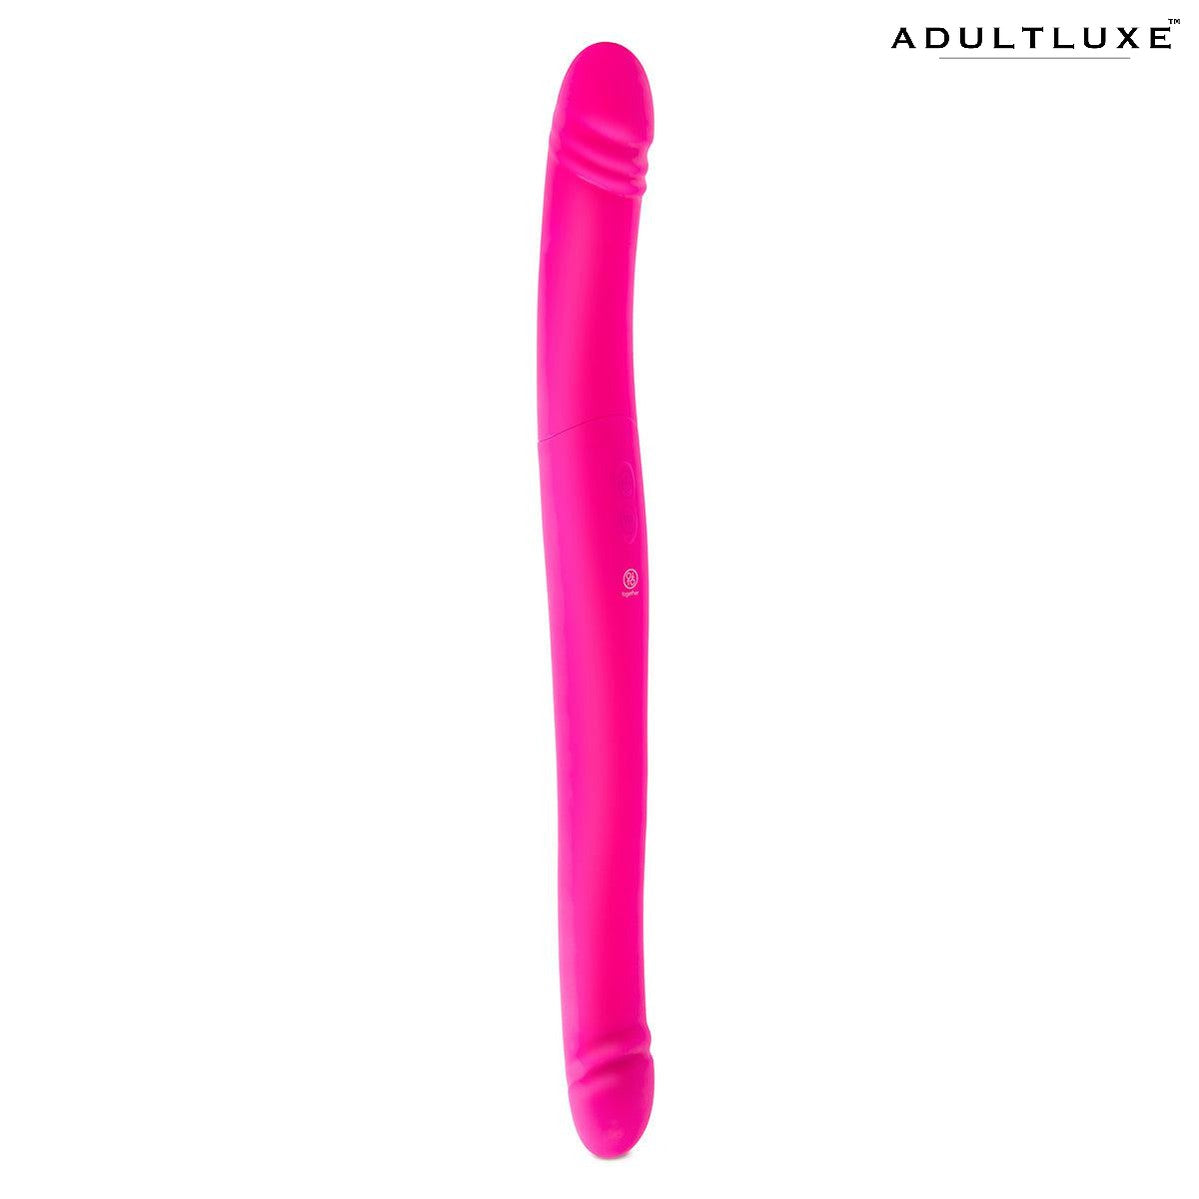 Together Vibe Duo 17.5 Inches Thrusting and Vibrating Dual Dildo